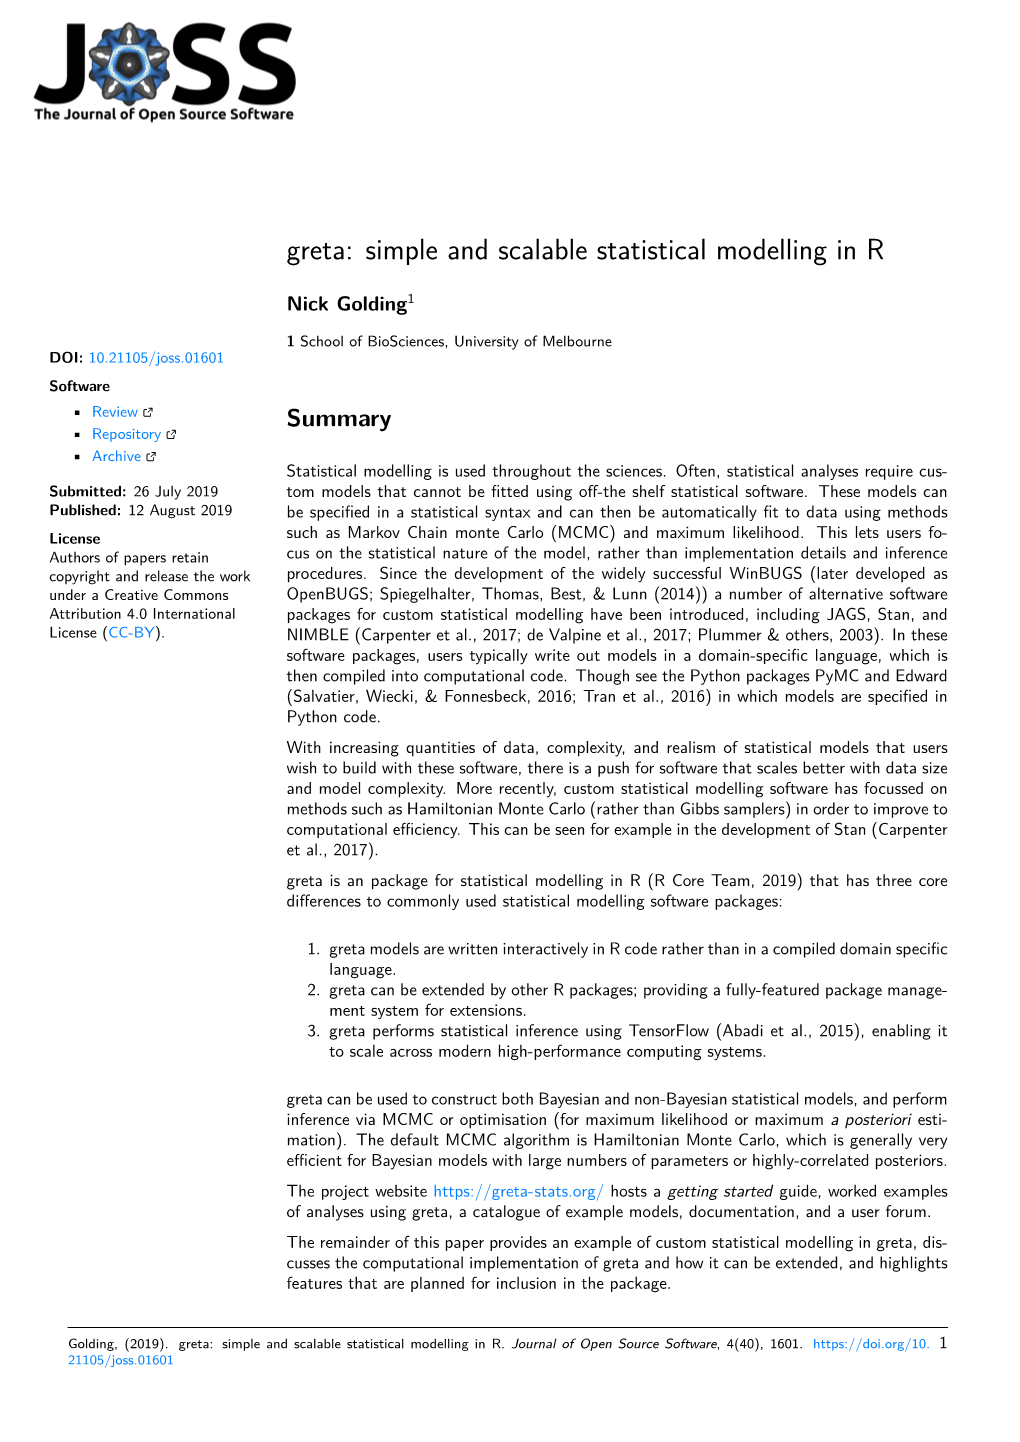 Greta: Simple and Scalable Statistical Modelling in R